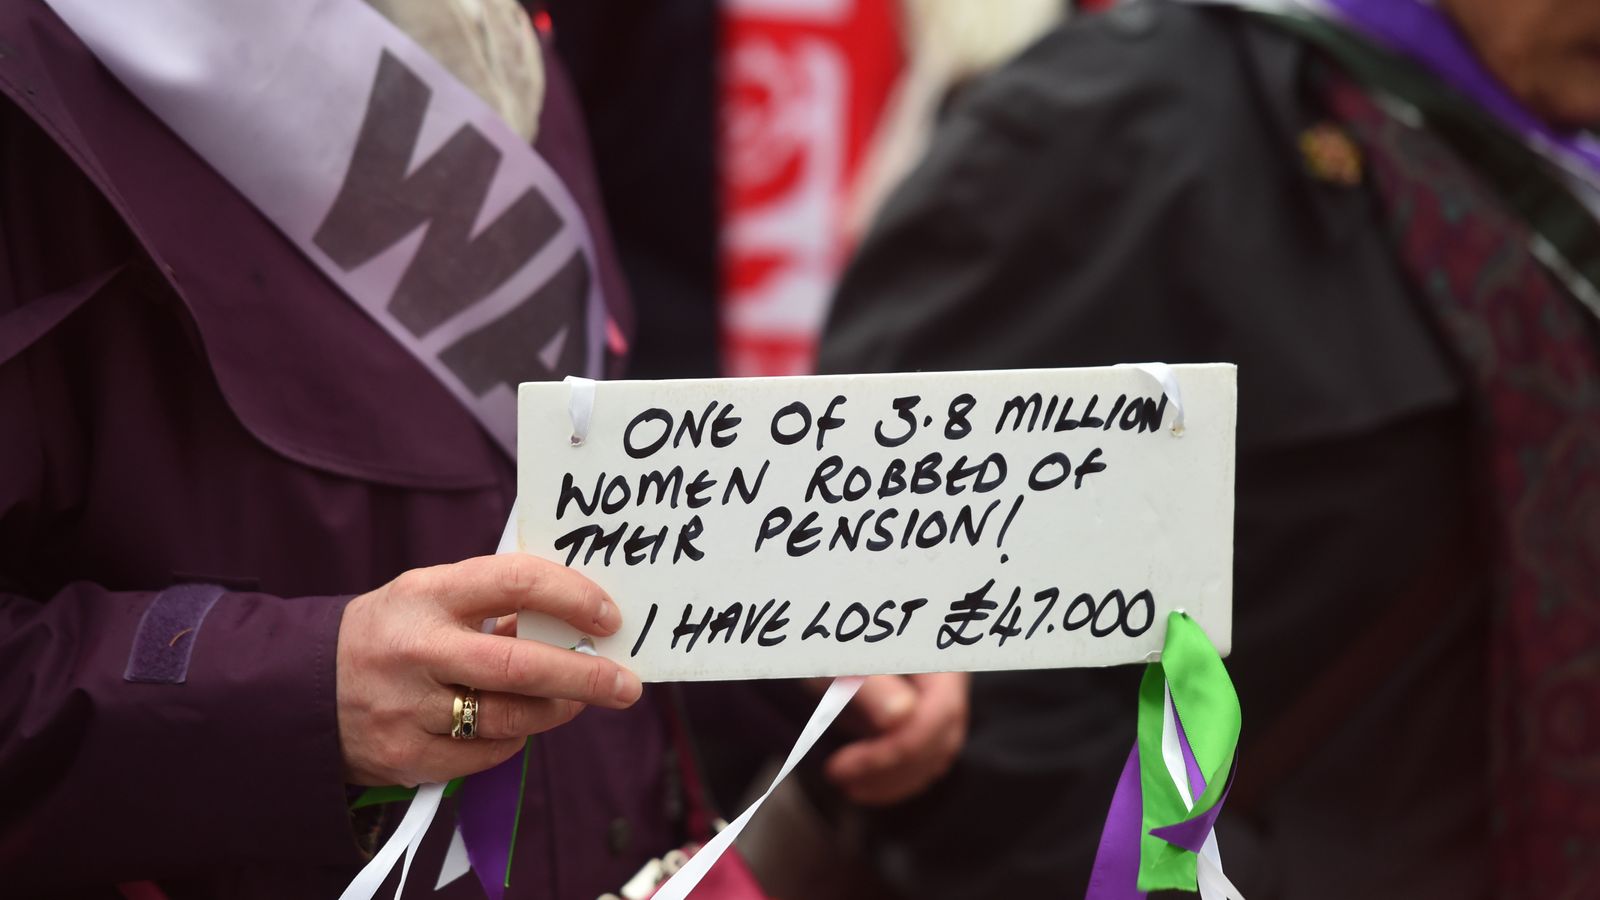 What is a Waspi woman and what happened to them?